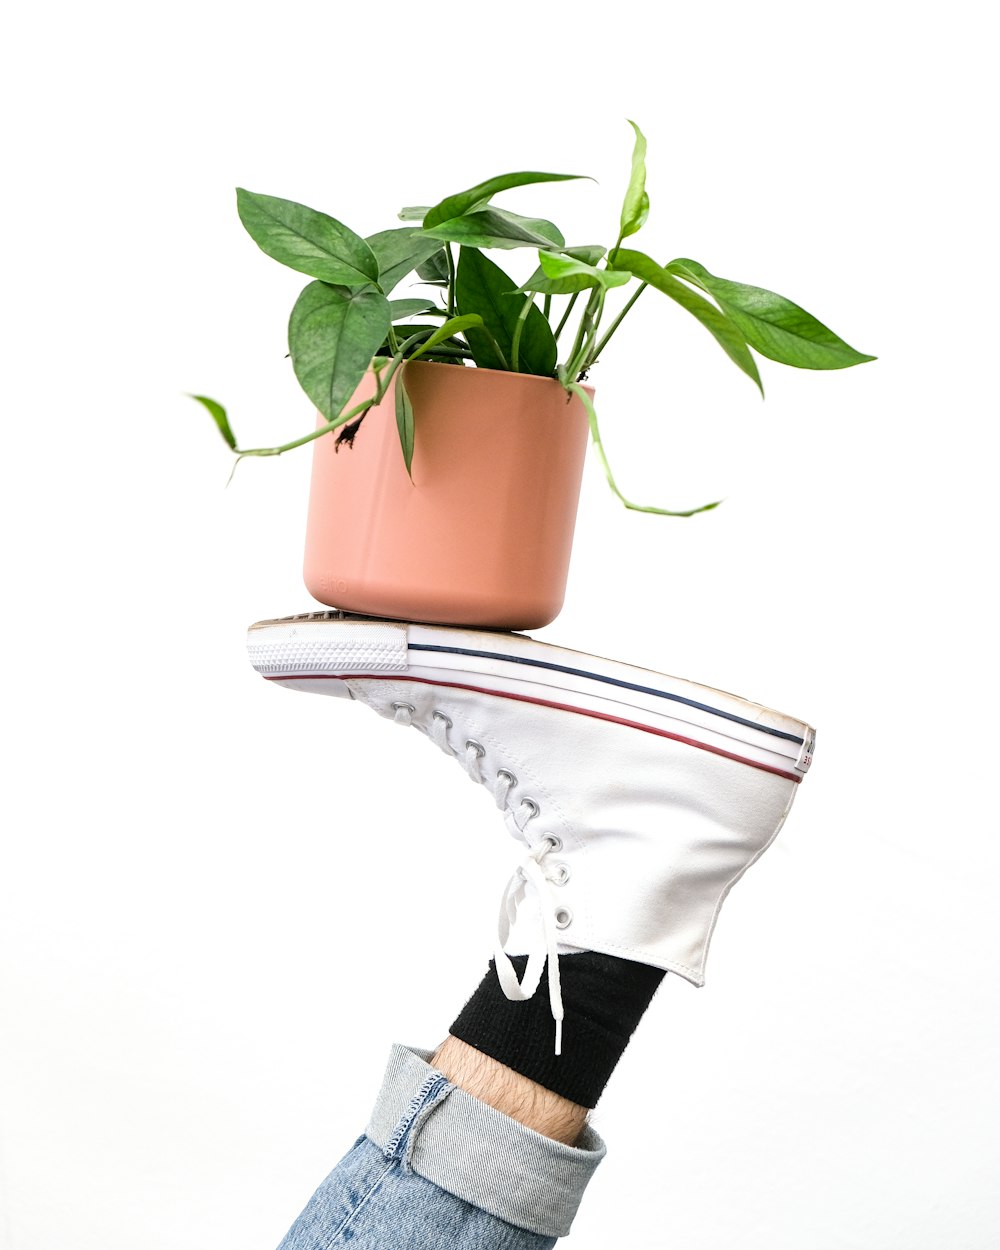 a person's feet with a potted plant on their feet